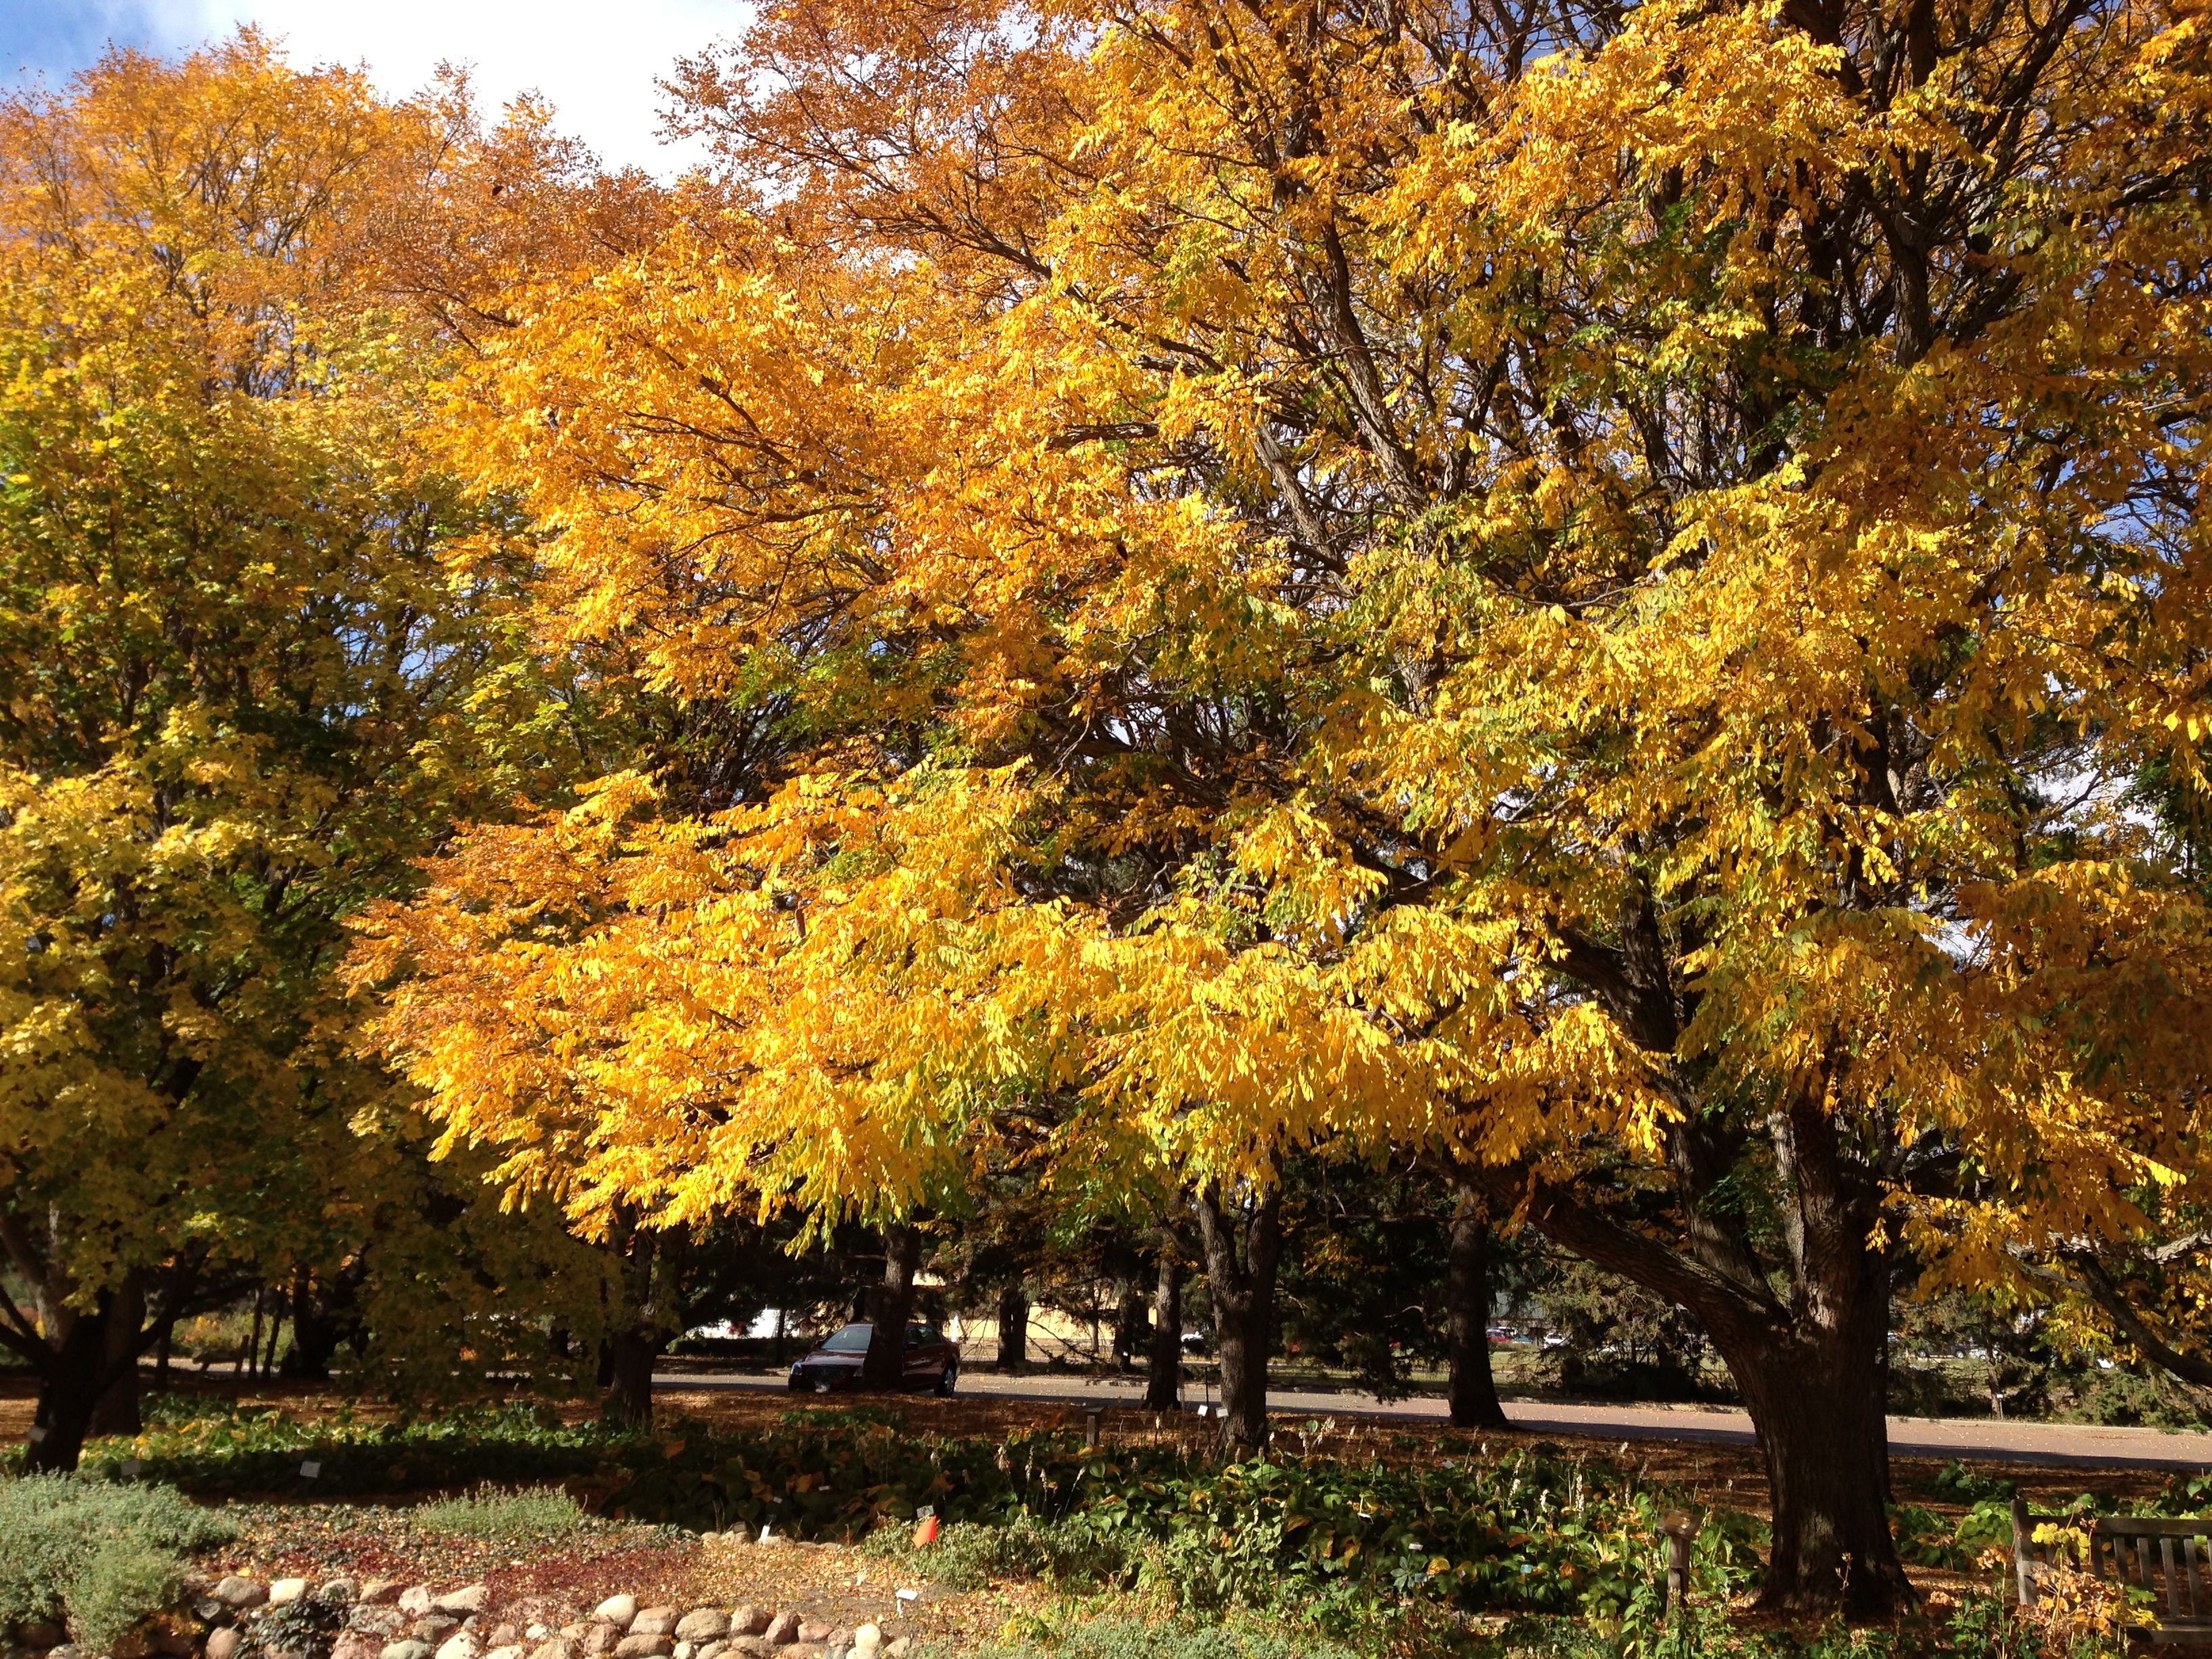 A grove of trees with bright yellow and orange leaves.